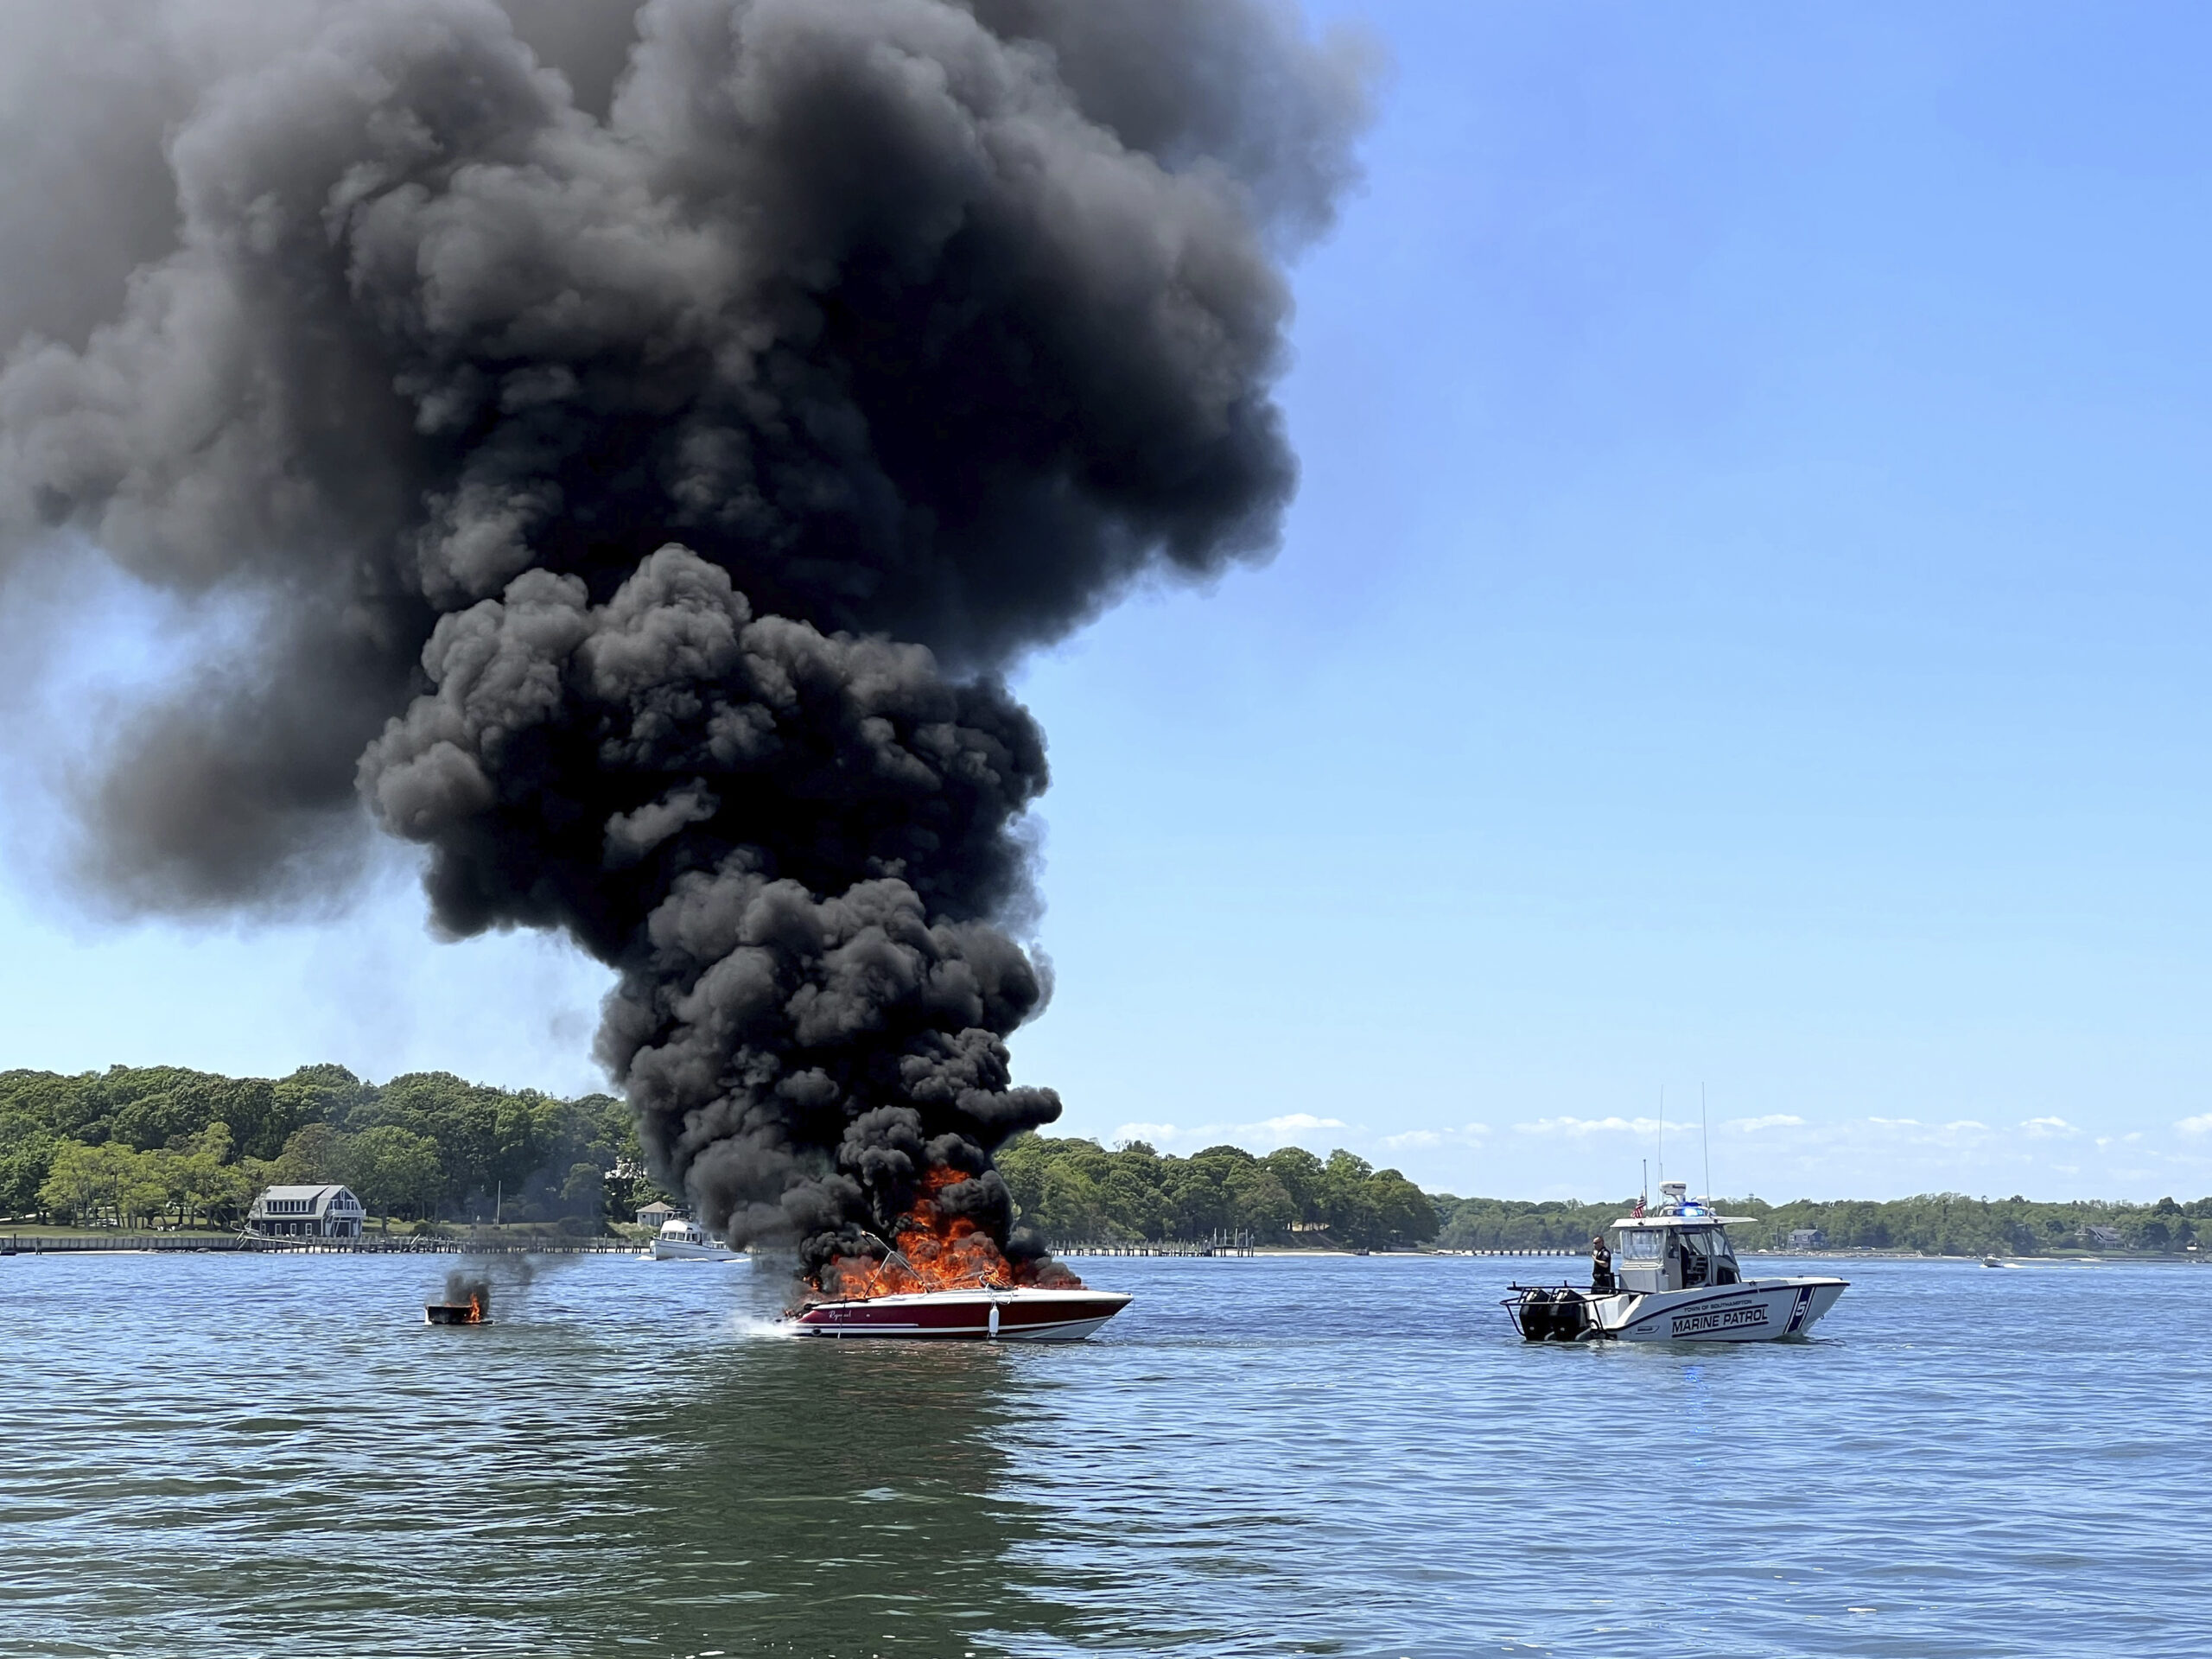 Fires like the one that engulfed this powerboat off North Haven last May demonstrate the need for a new fireboat for the Sag Harbor Fire Department, volunteers say. PETER BOODY